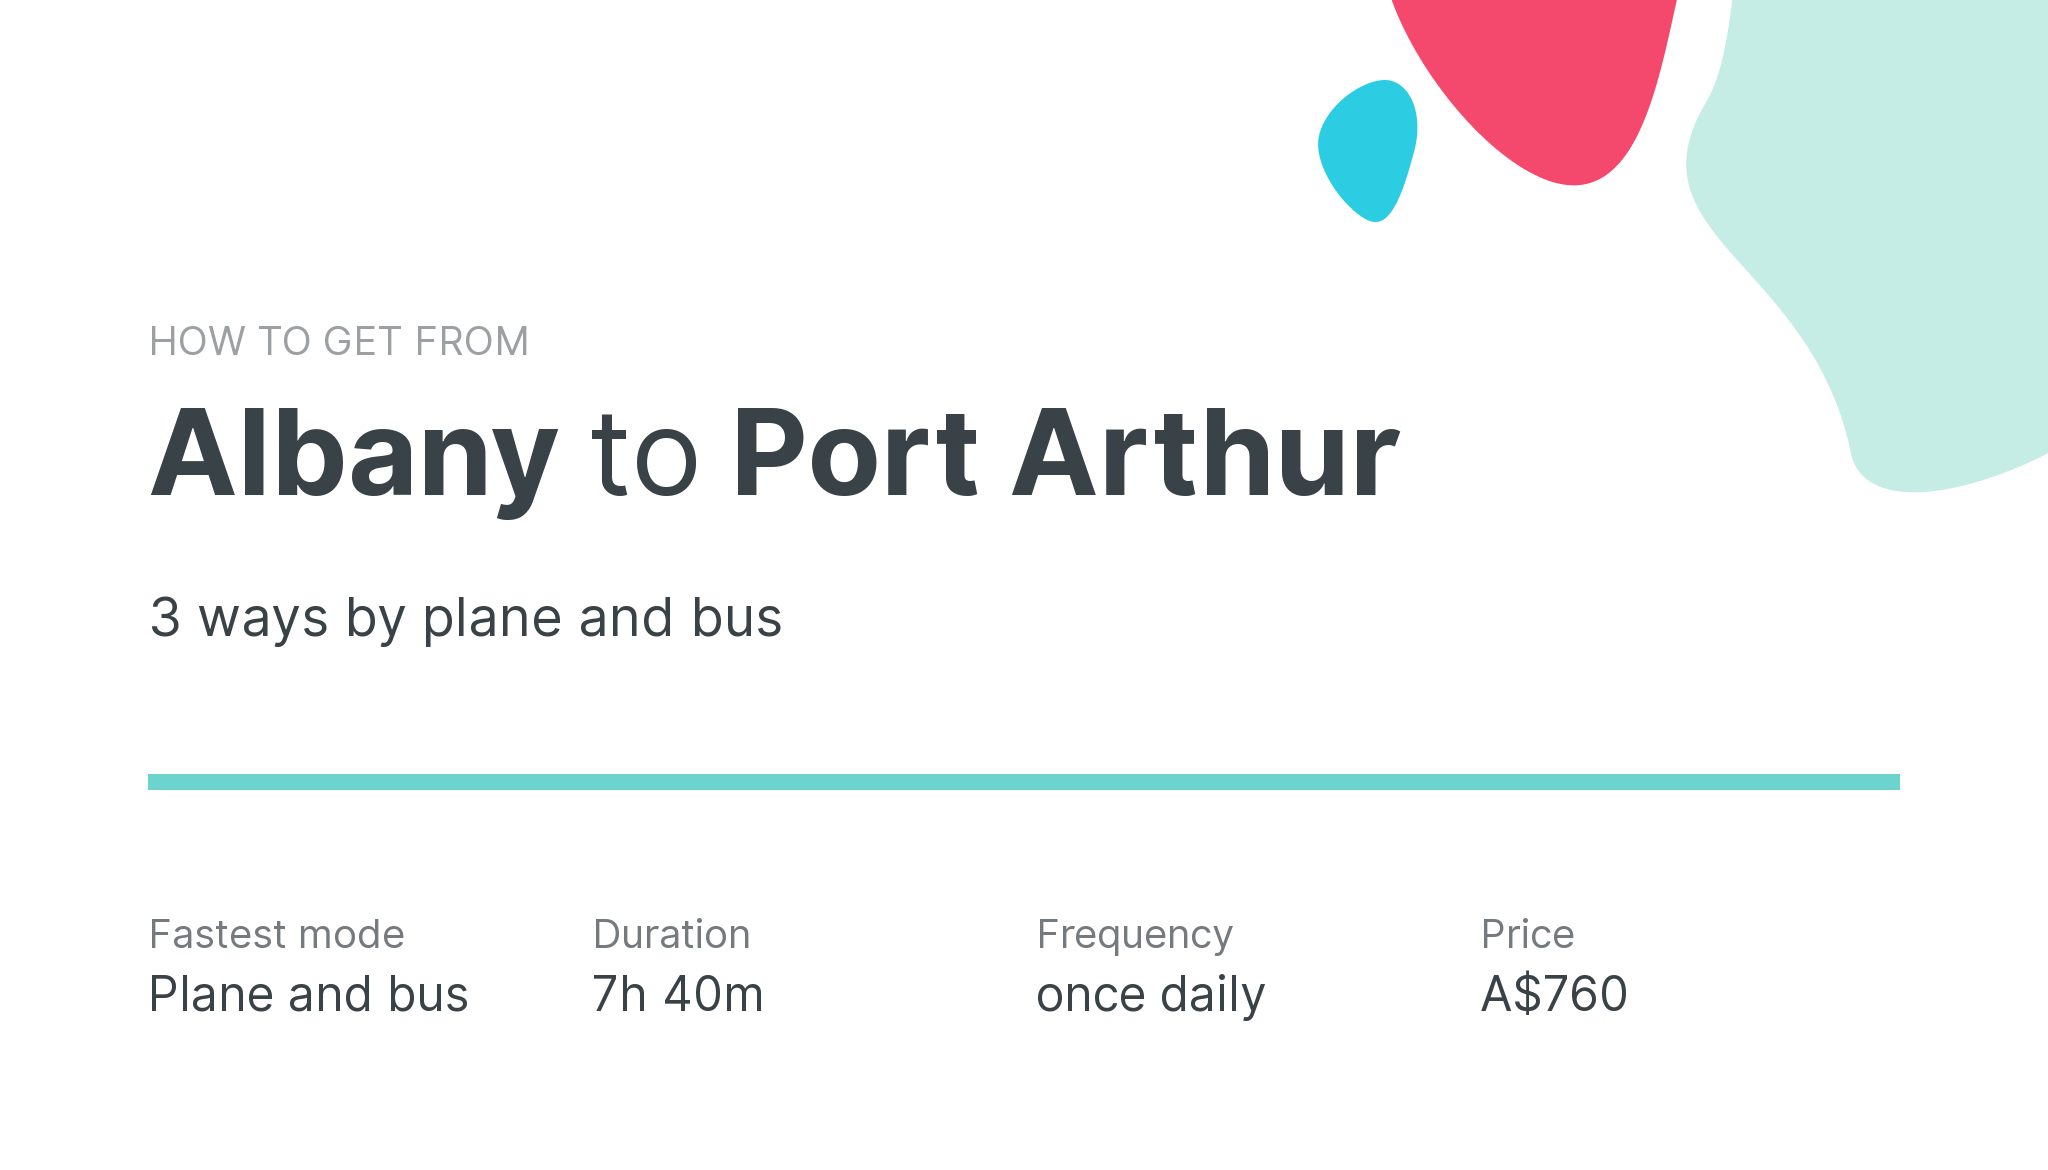 How do I get from Albany to Port Arthur